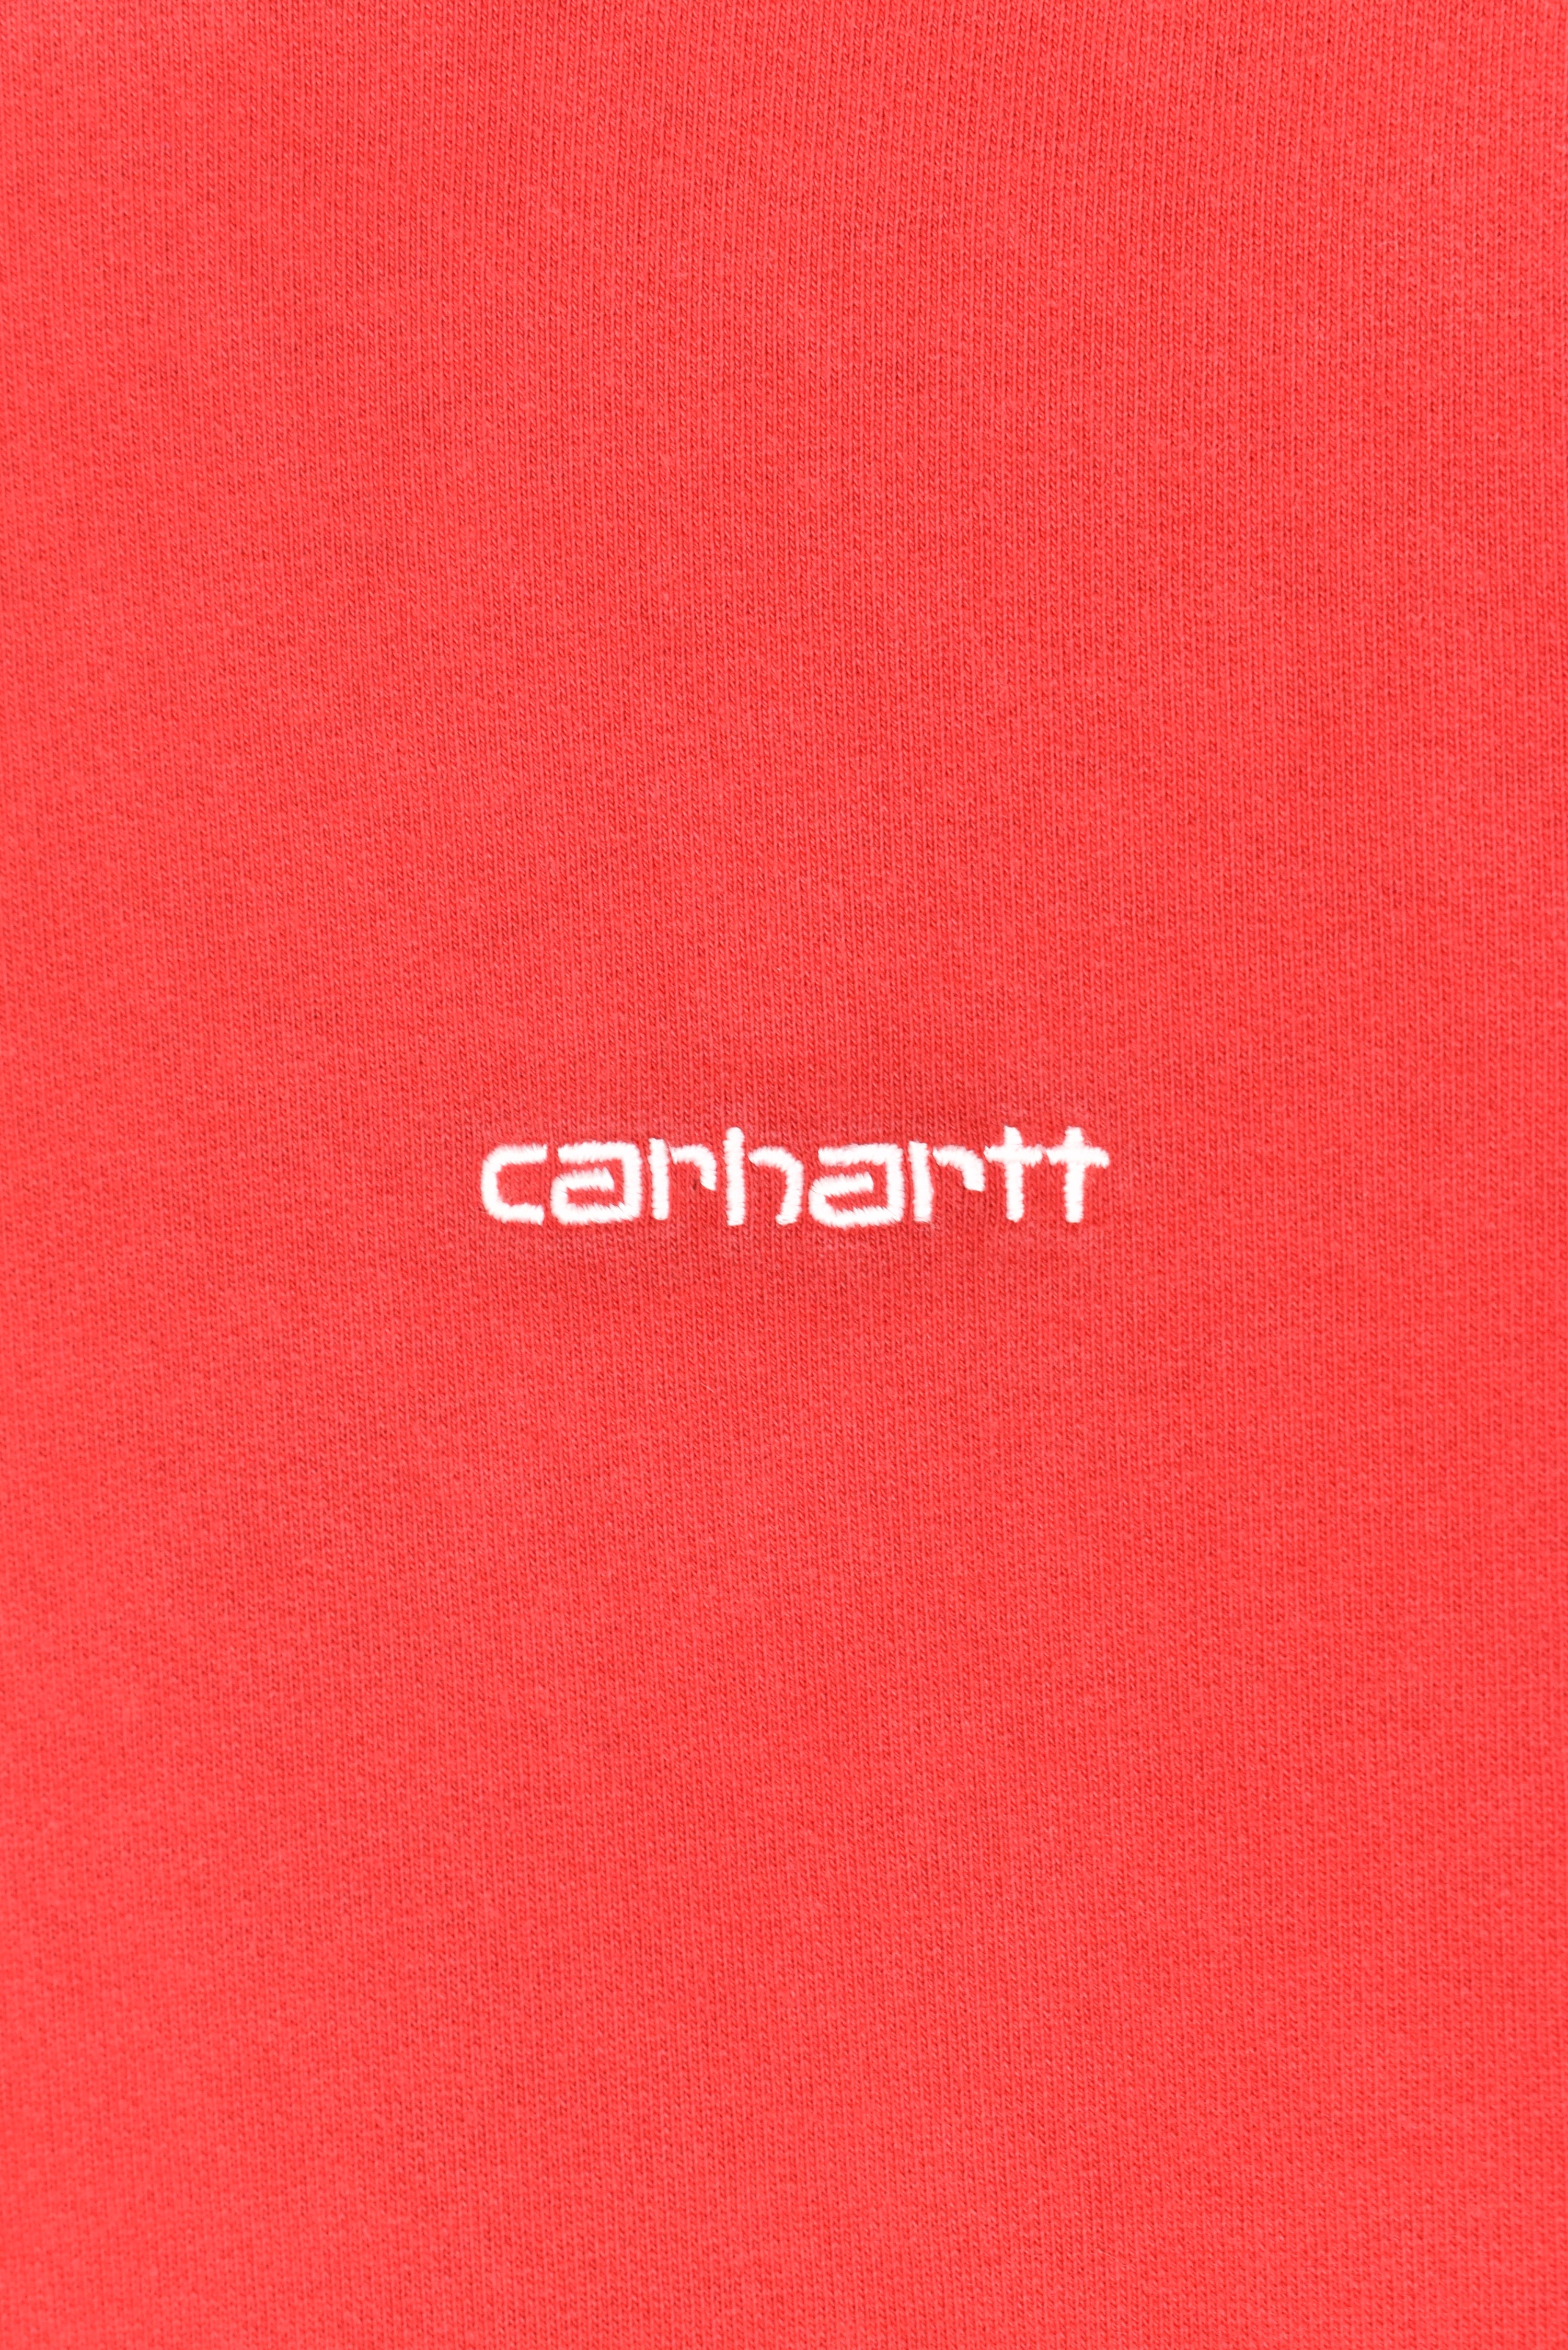 VINTAGE CARHARTT EMBROIDERED RED HOODIE | SMALL CARHARTT